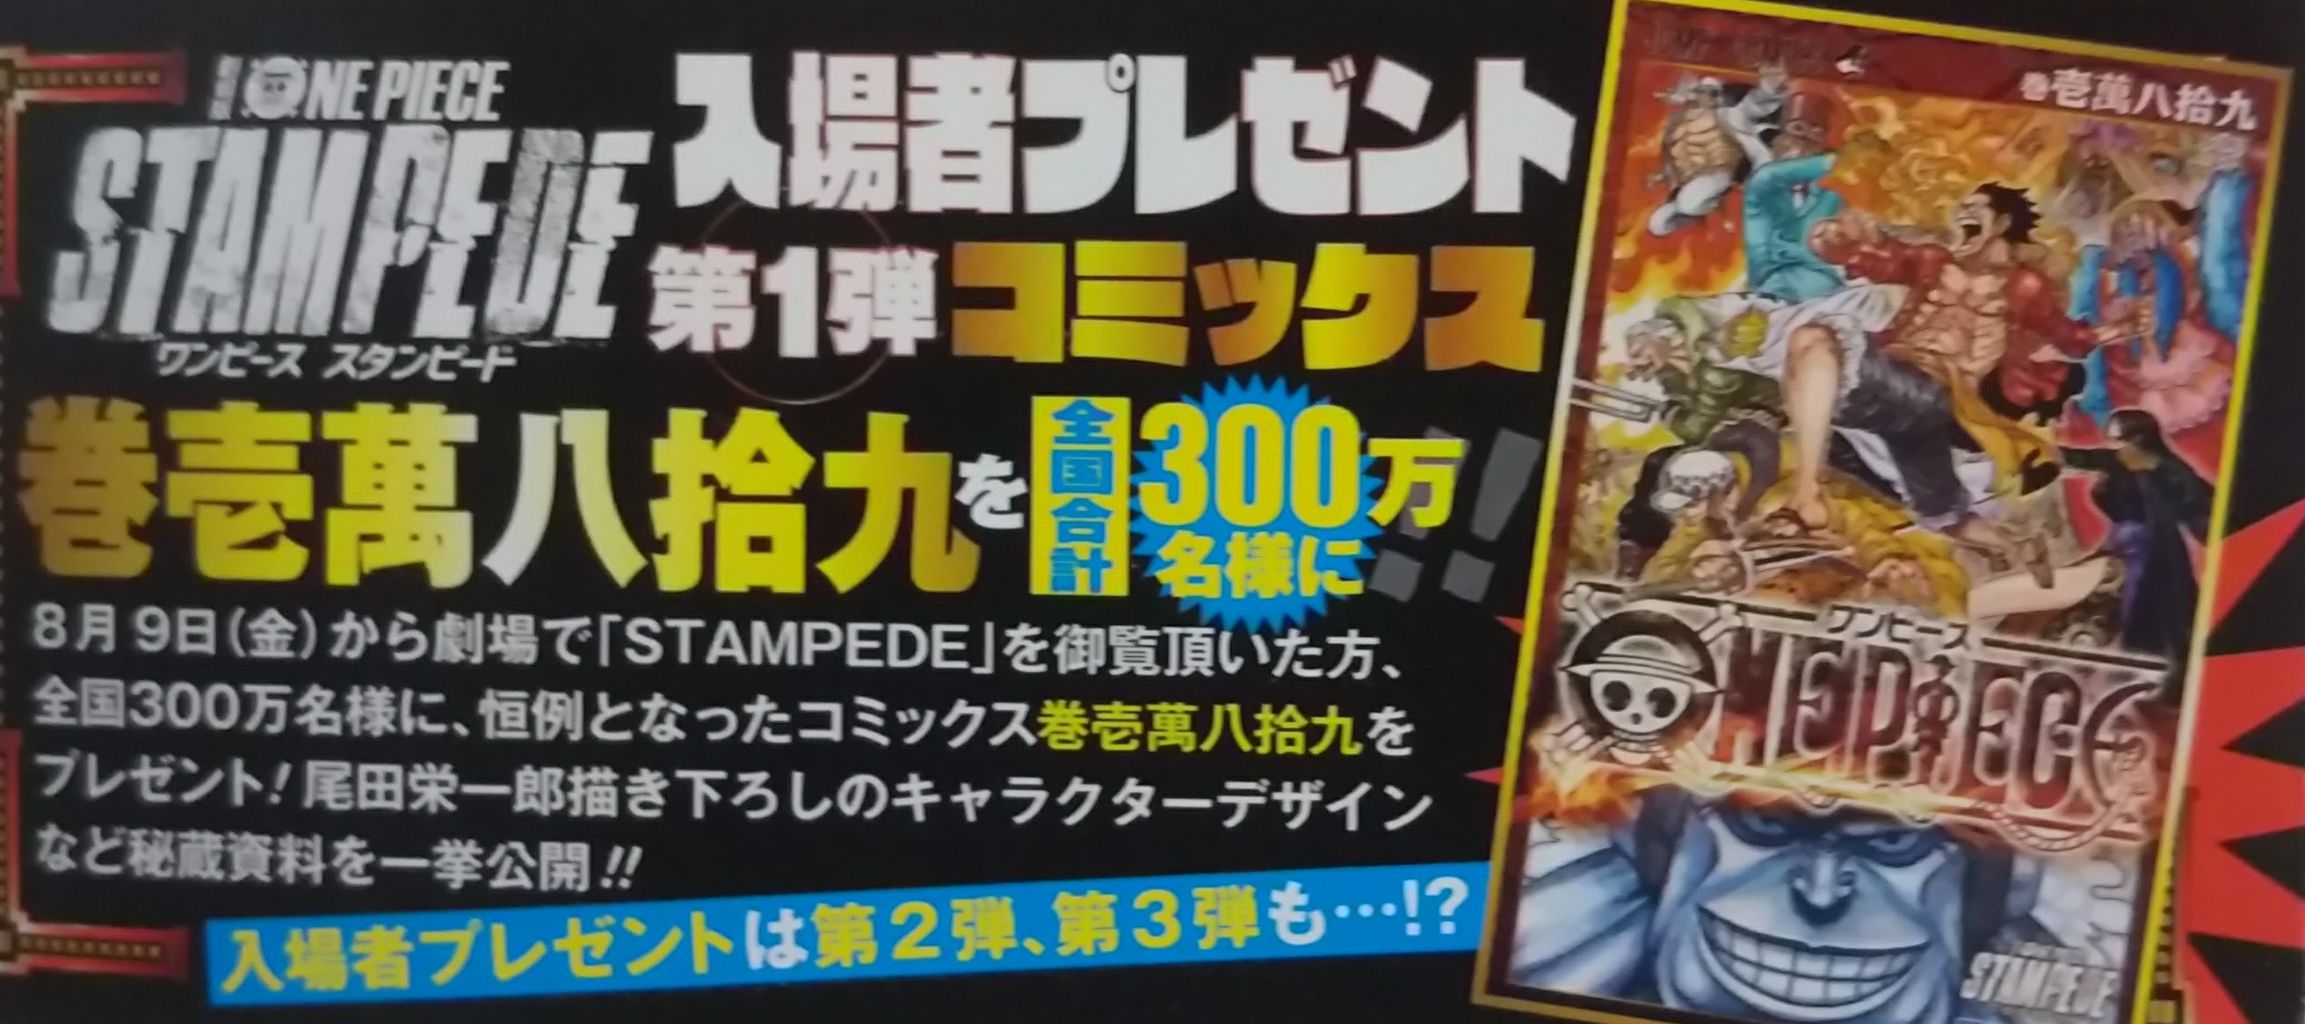 One Piece 巻九十三 えびす町の人気者 Chaos Hobby Blog